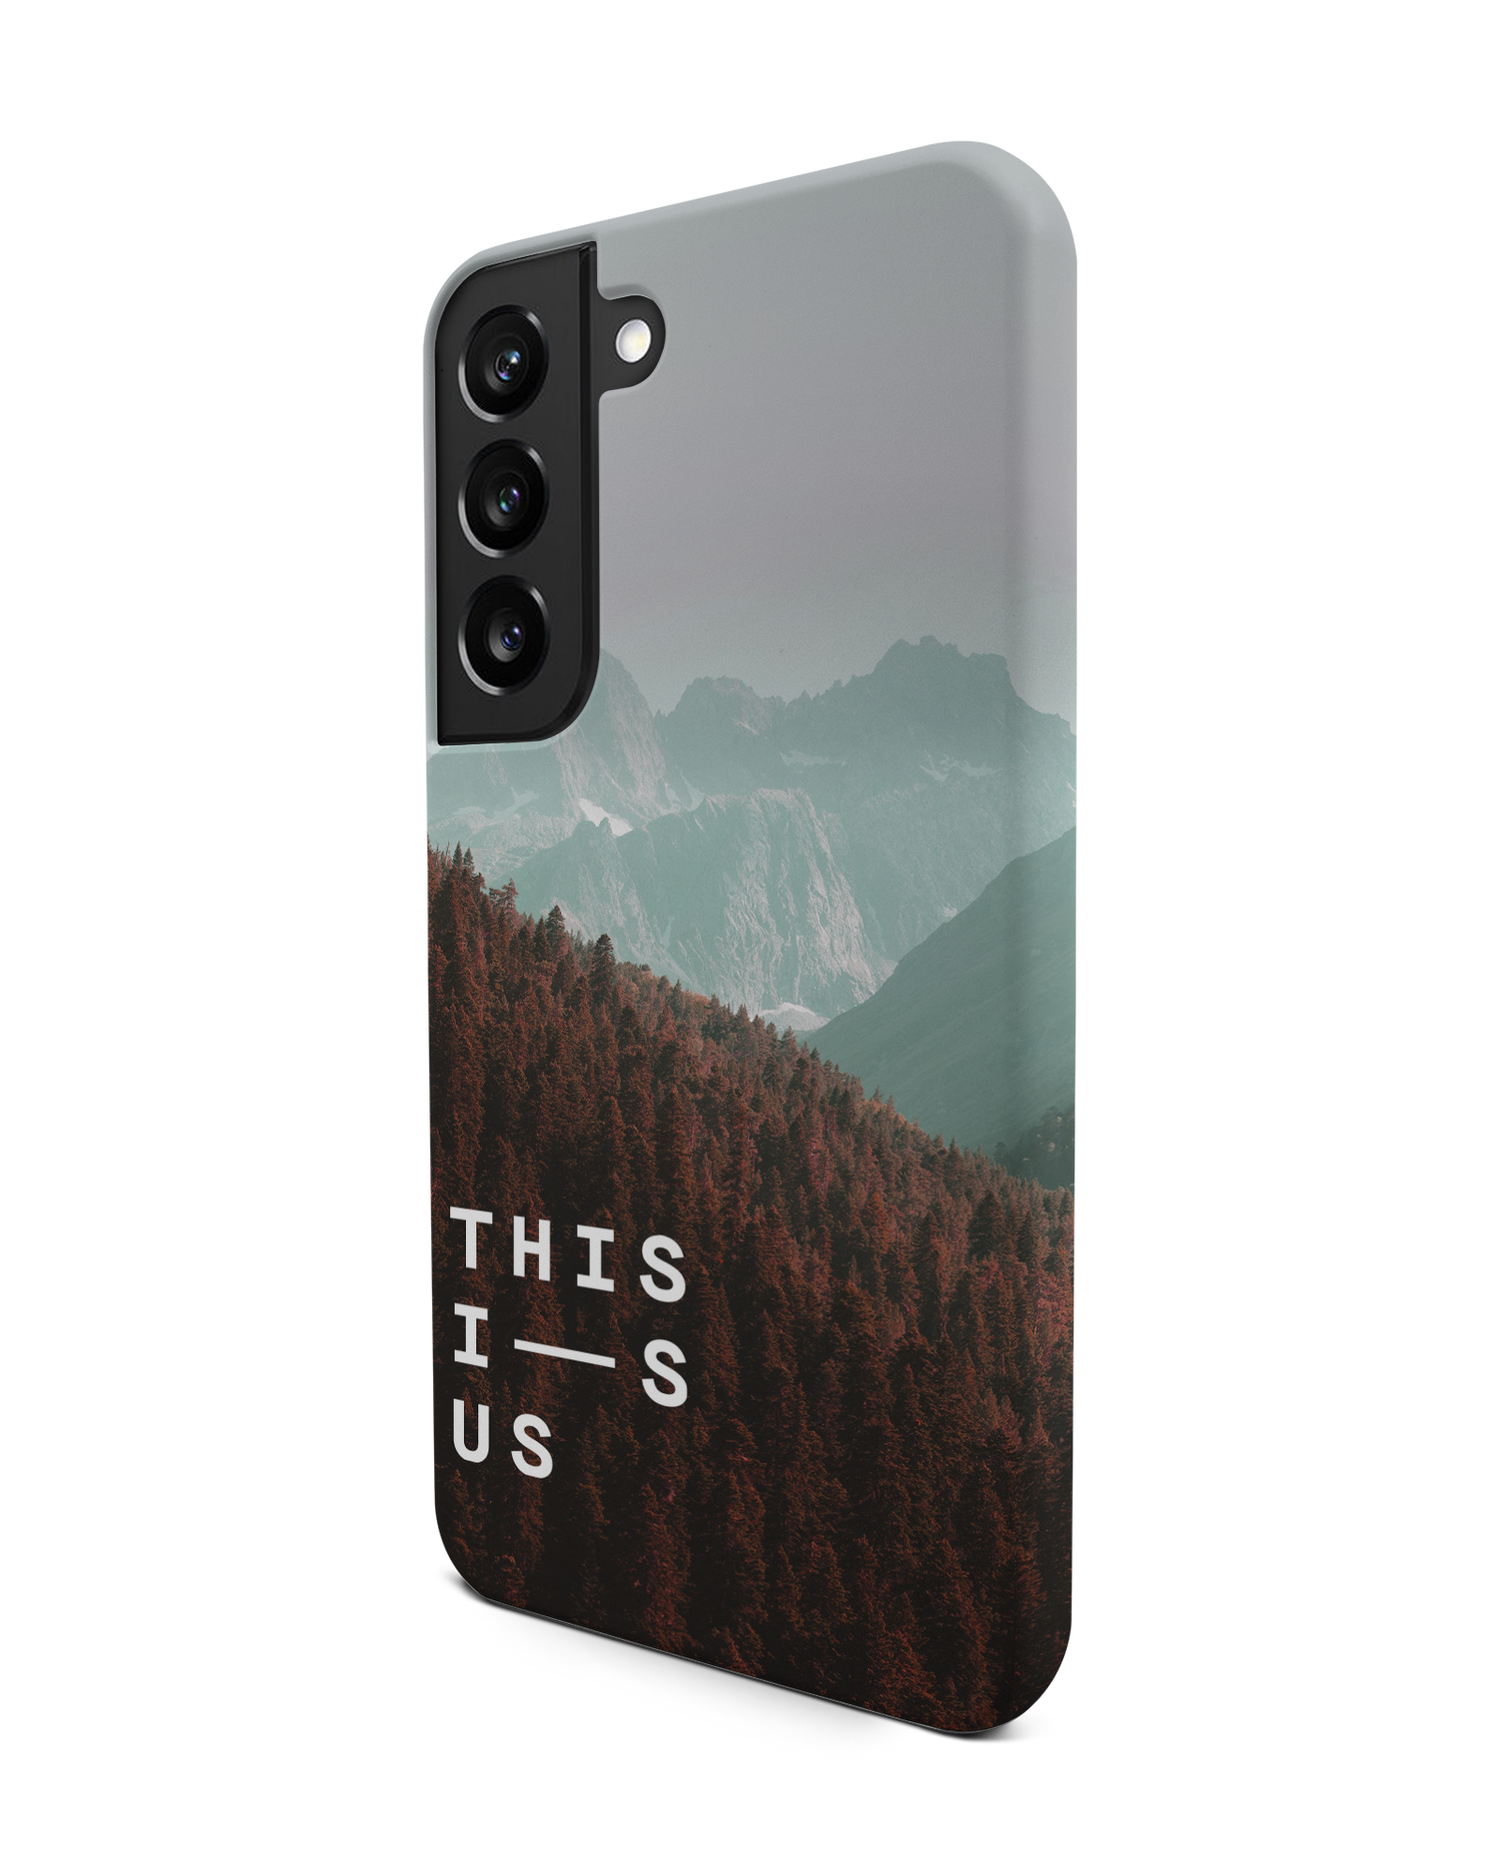 Into the Woods Premium Phone Case Samsung Galaxy S22 5G: View from the right side